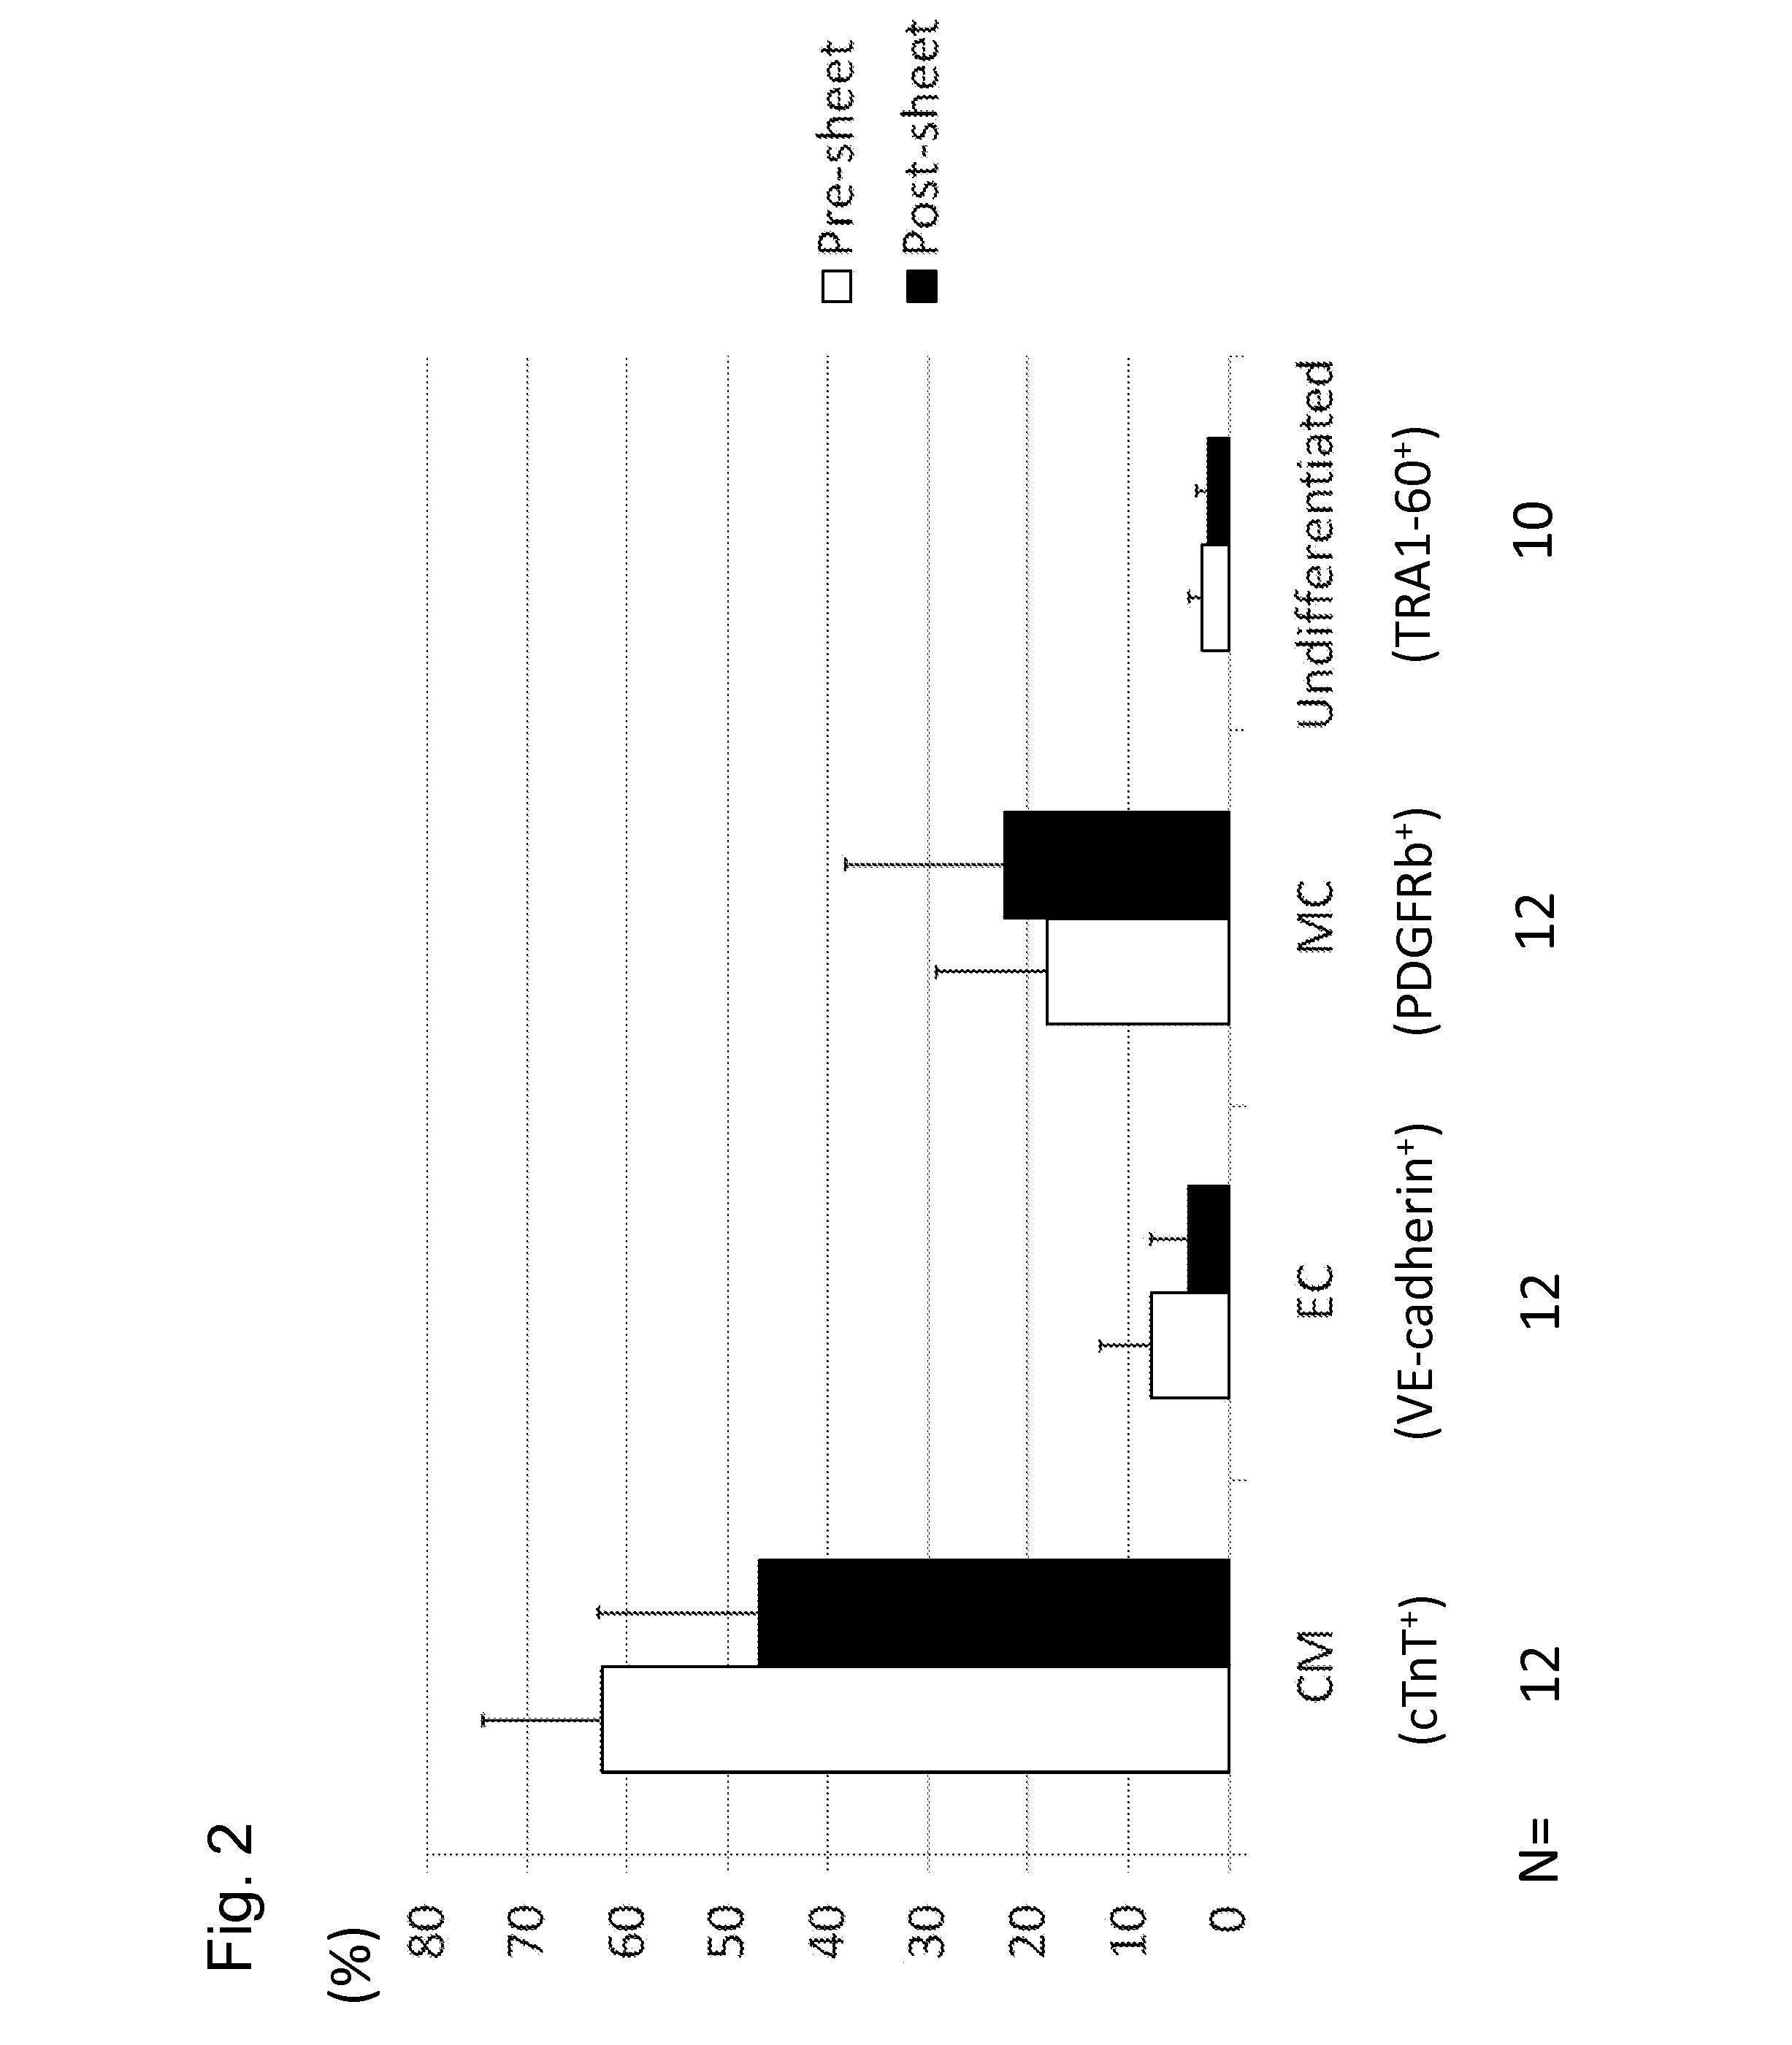 Method for producing mixed cell population of cardiomyocytes and vascular cells from induced pluripotent stem cell